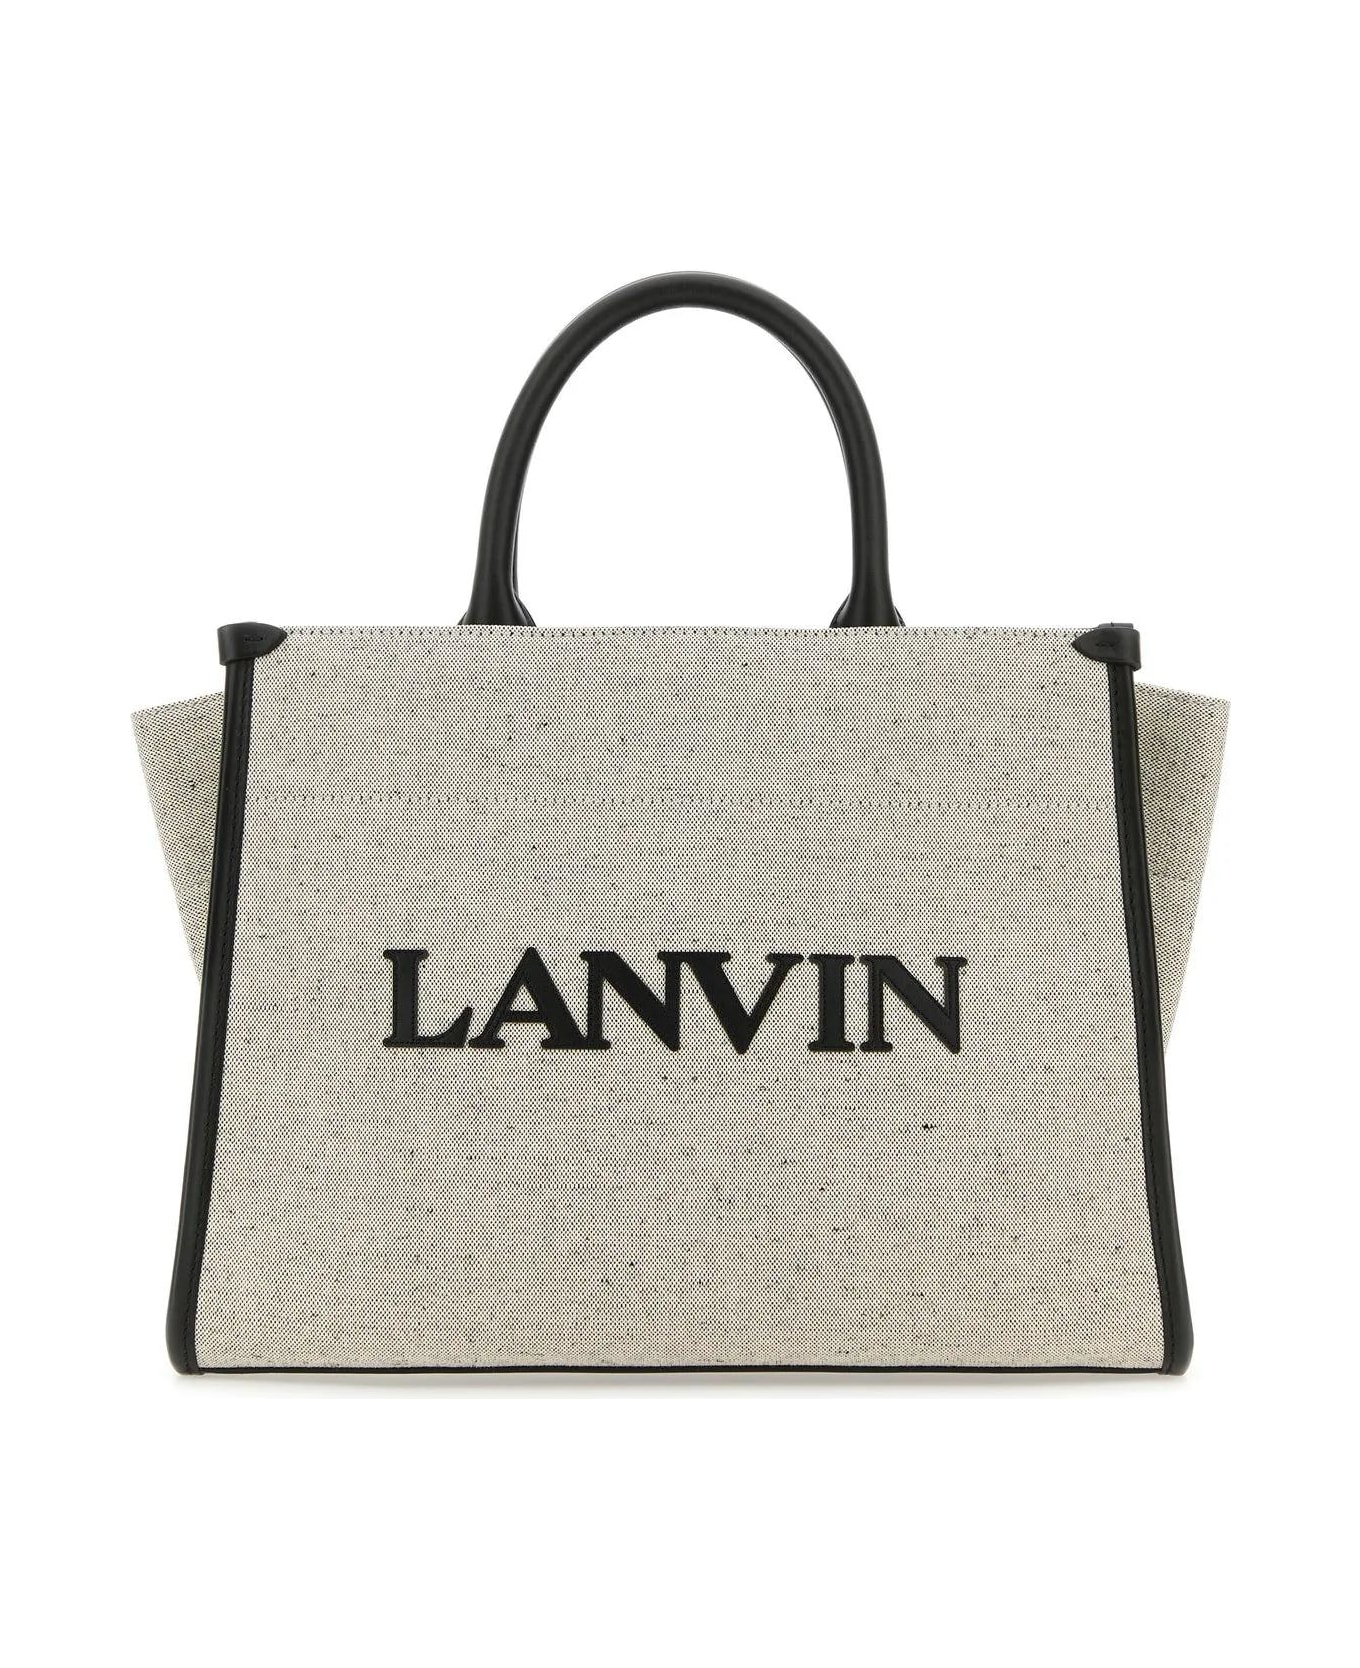 Lanvin Two-tone Canvas Small In & Out Shopping Bag - Beige Black